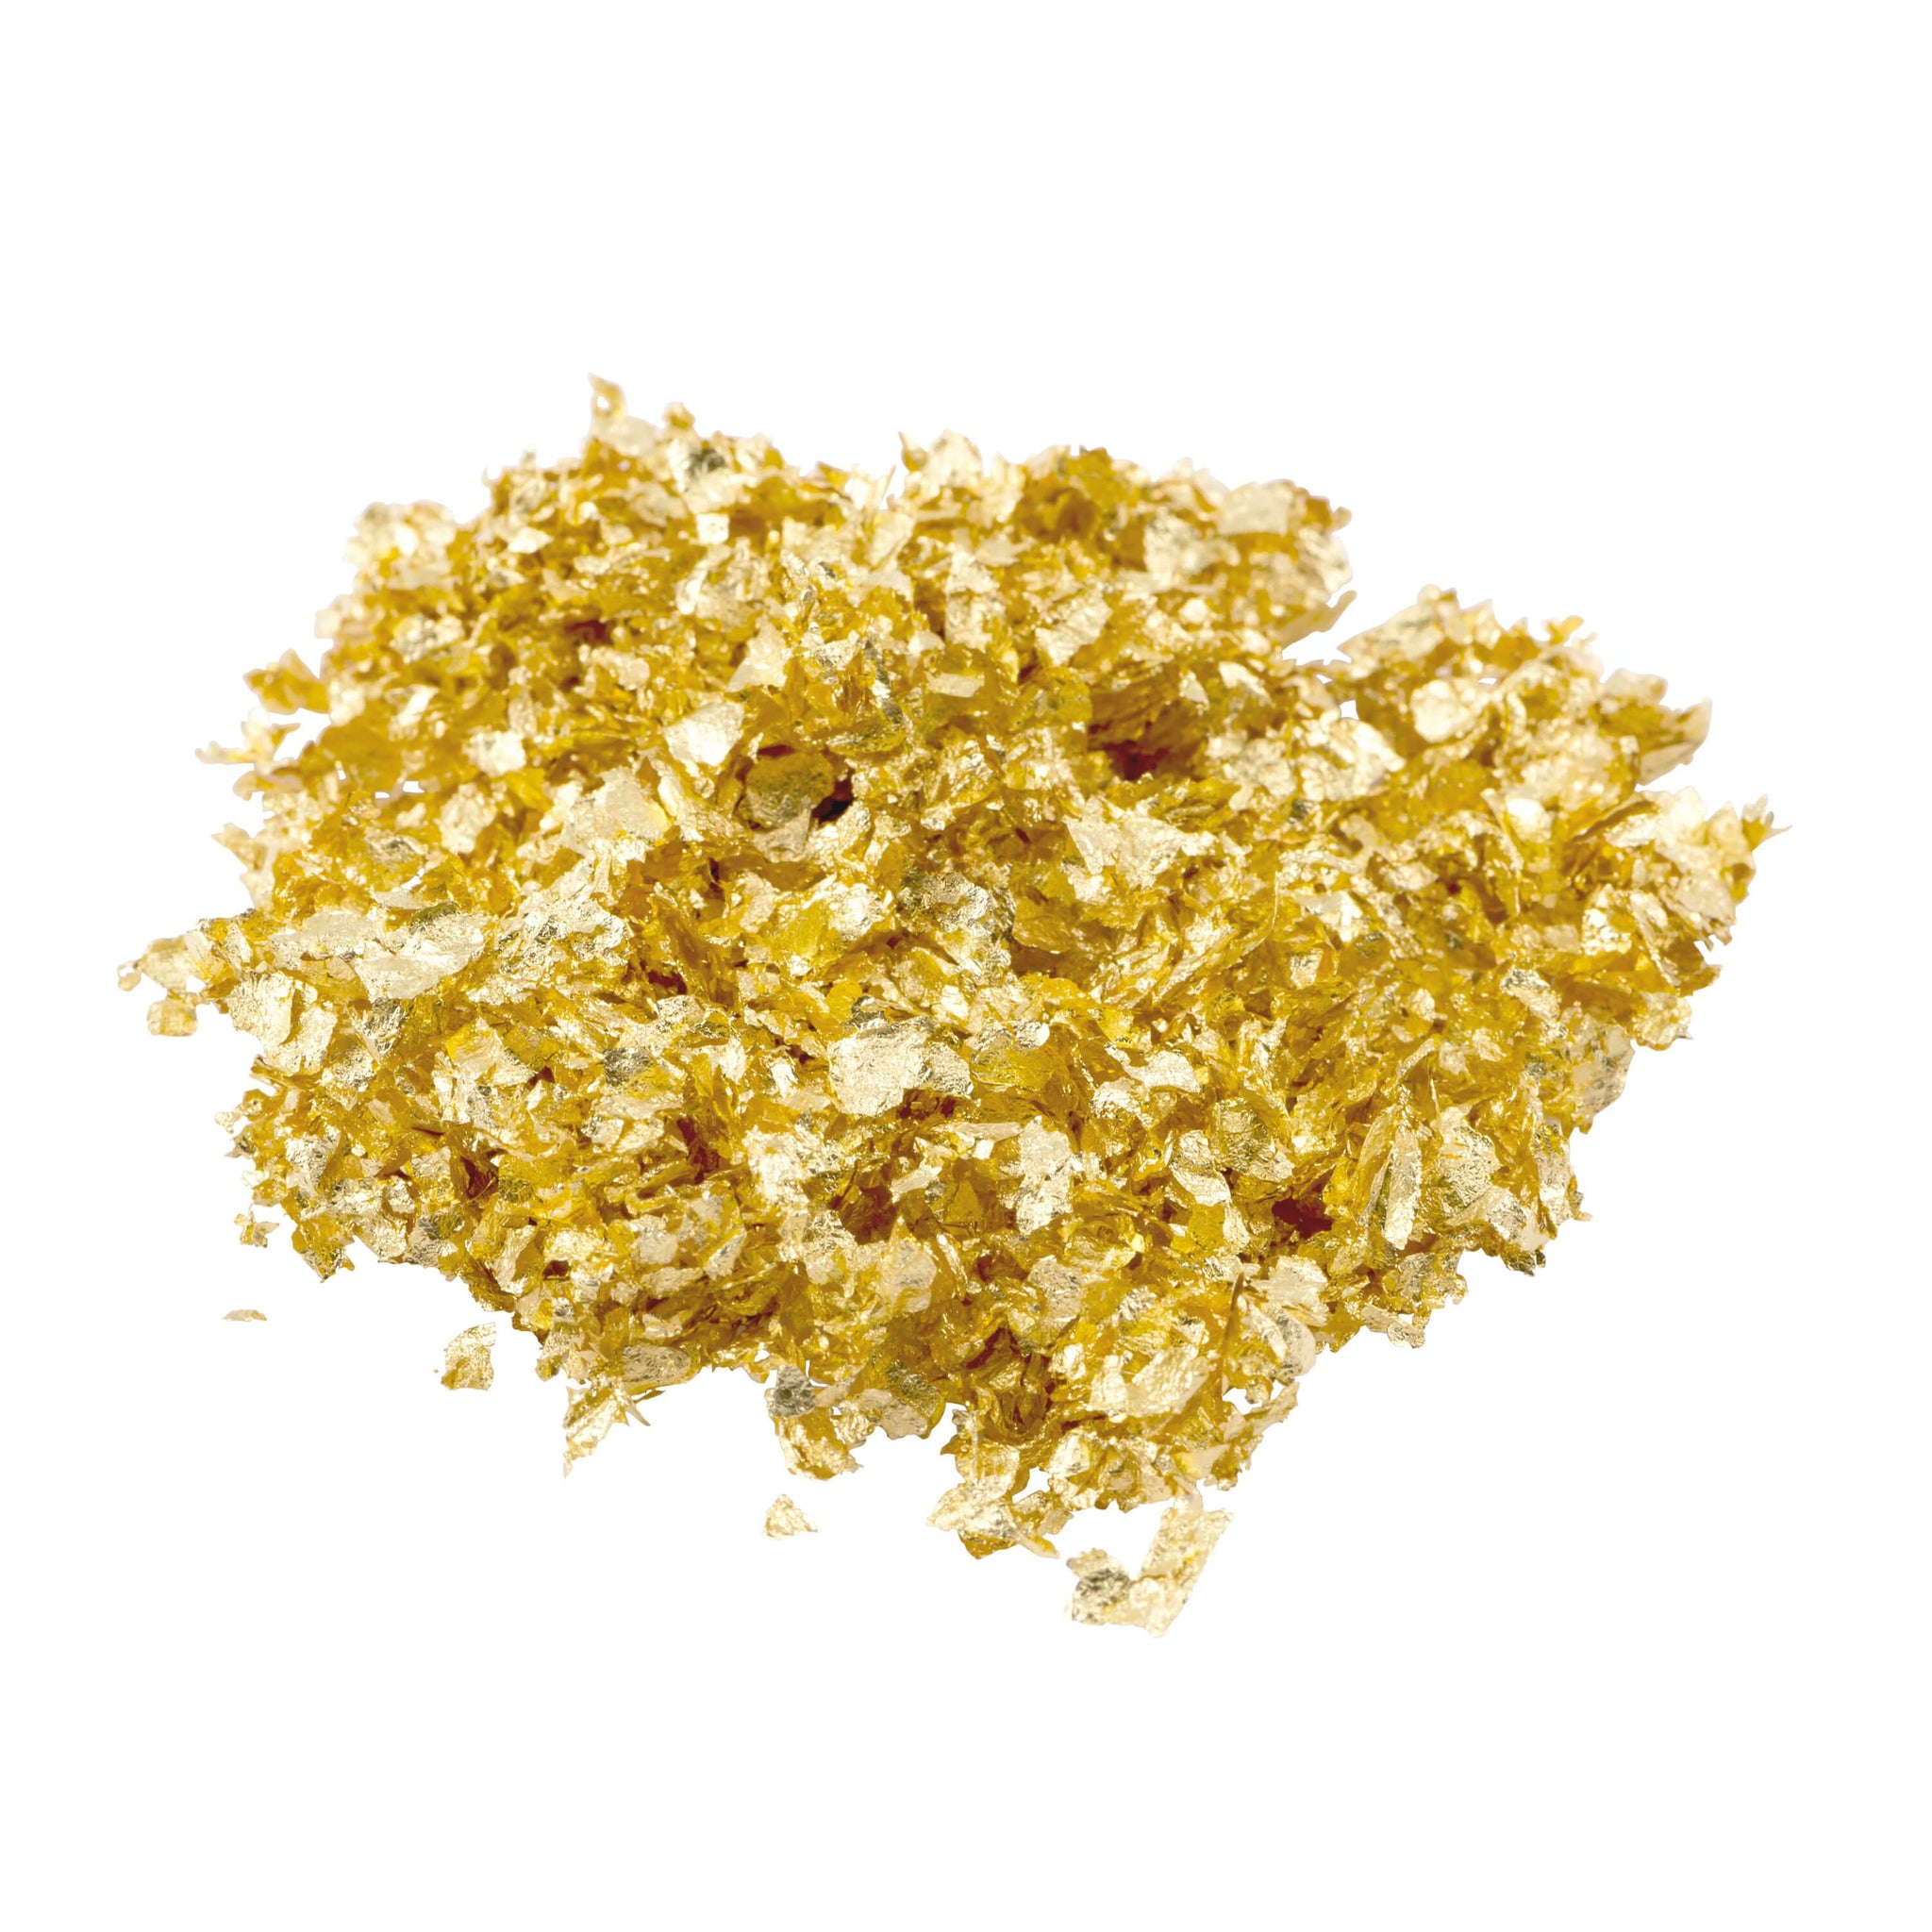 Slofoodgroup - Edible Gold Flakes - 300 mg - Gold Leaf Flakes for Garnishing and Decoration of Food, Drinks, Nails and More